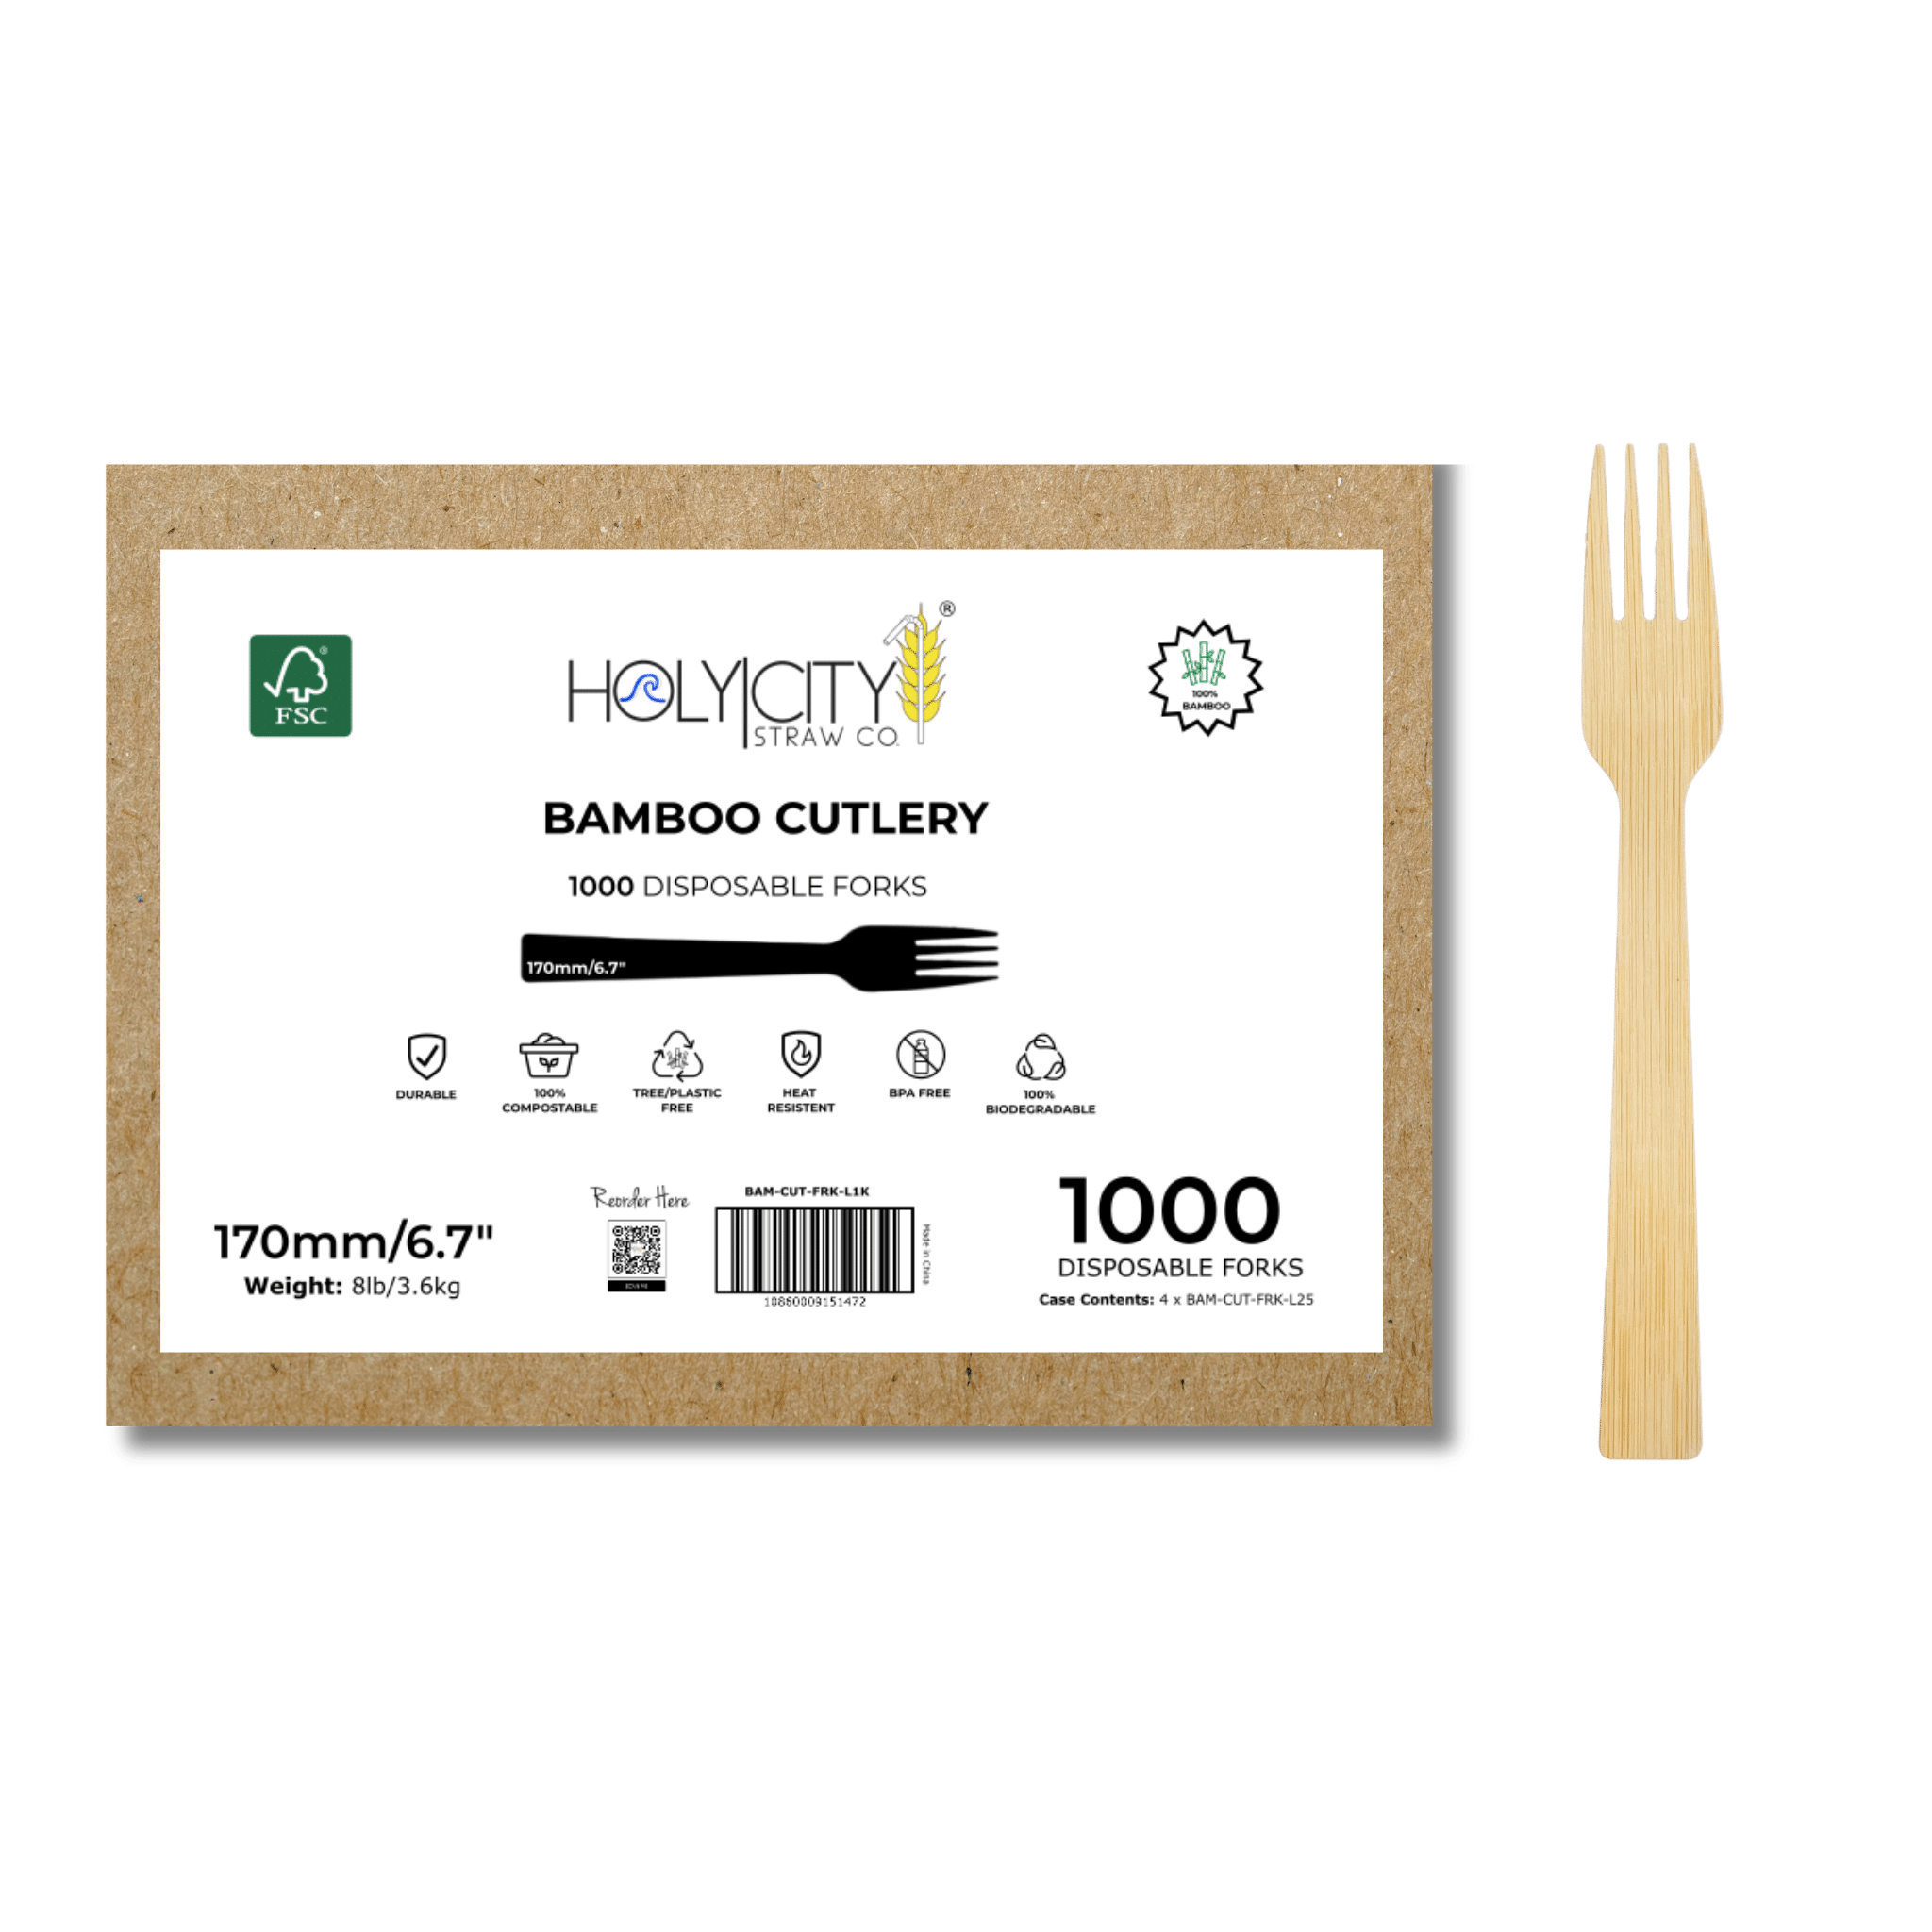 Case of  1000 Holy City Straw Co. disposable bamboo forks with a single bamboo fork beside it, highlighting features like durability, compostability, and being BPA-free